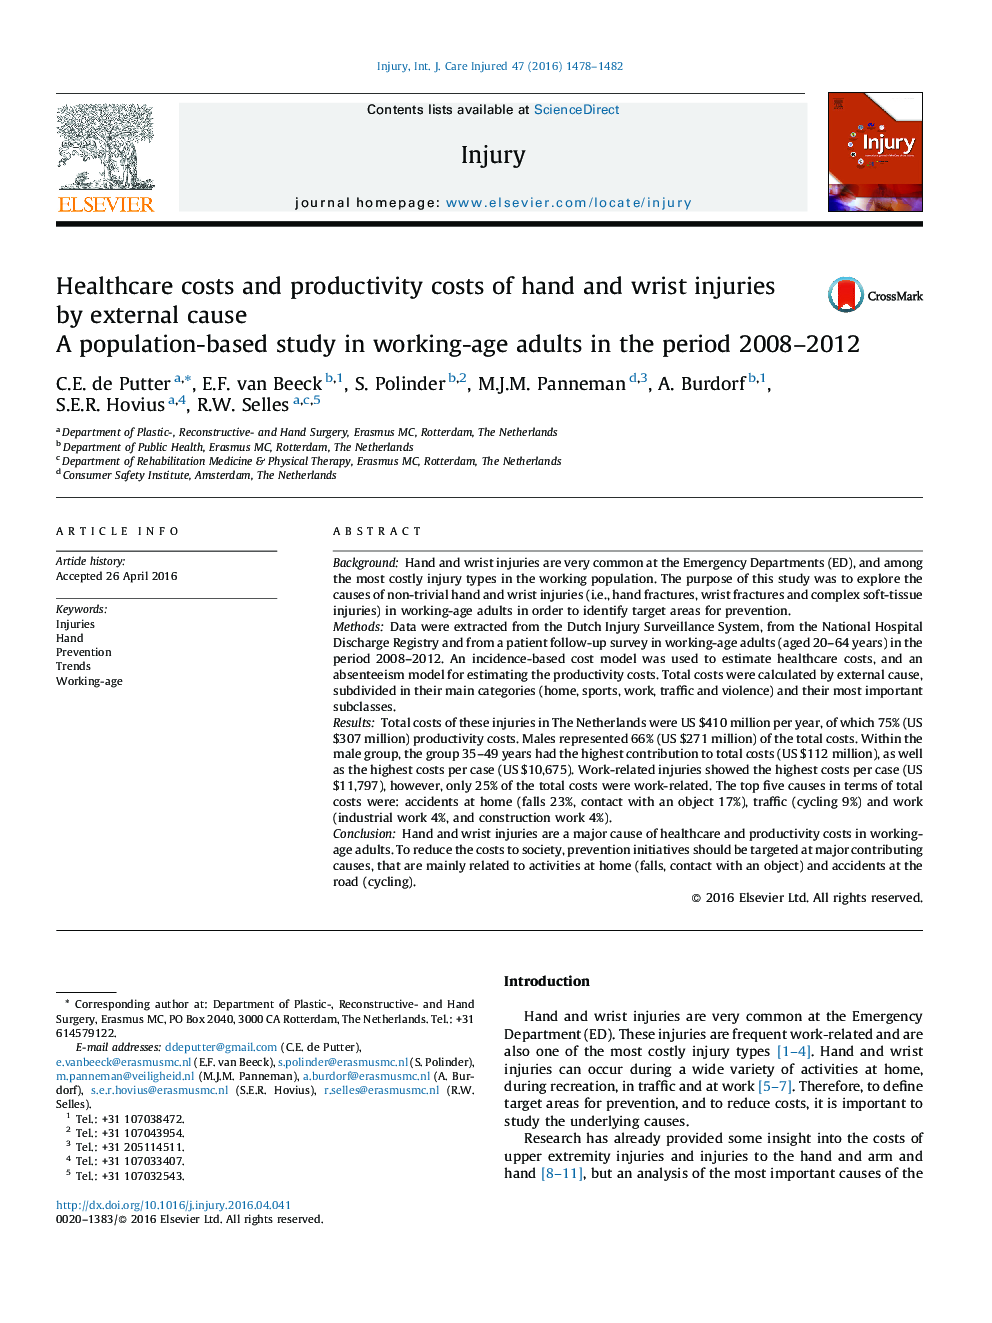 Healthcare costs and productivity costs of hand and wrist injuries by external cause: A population-based study in working-age adults in the period 2008-2012